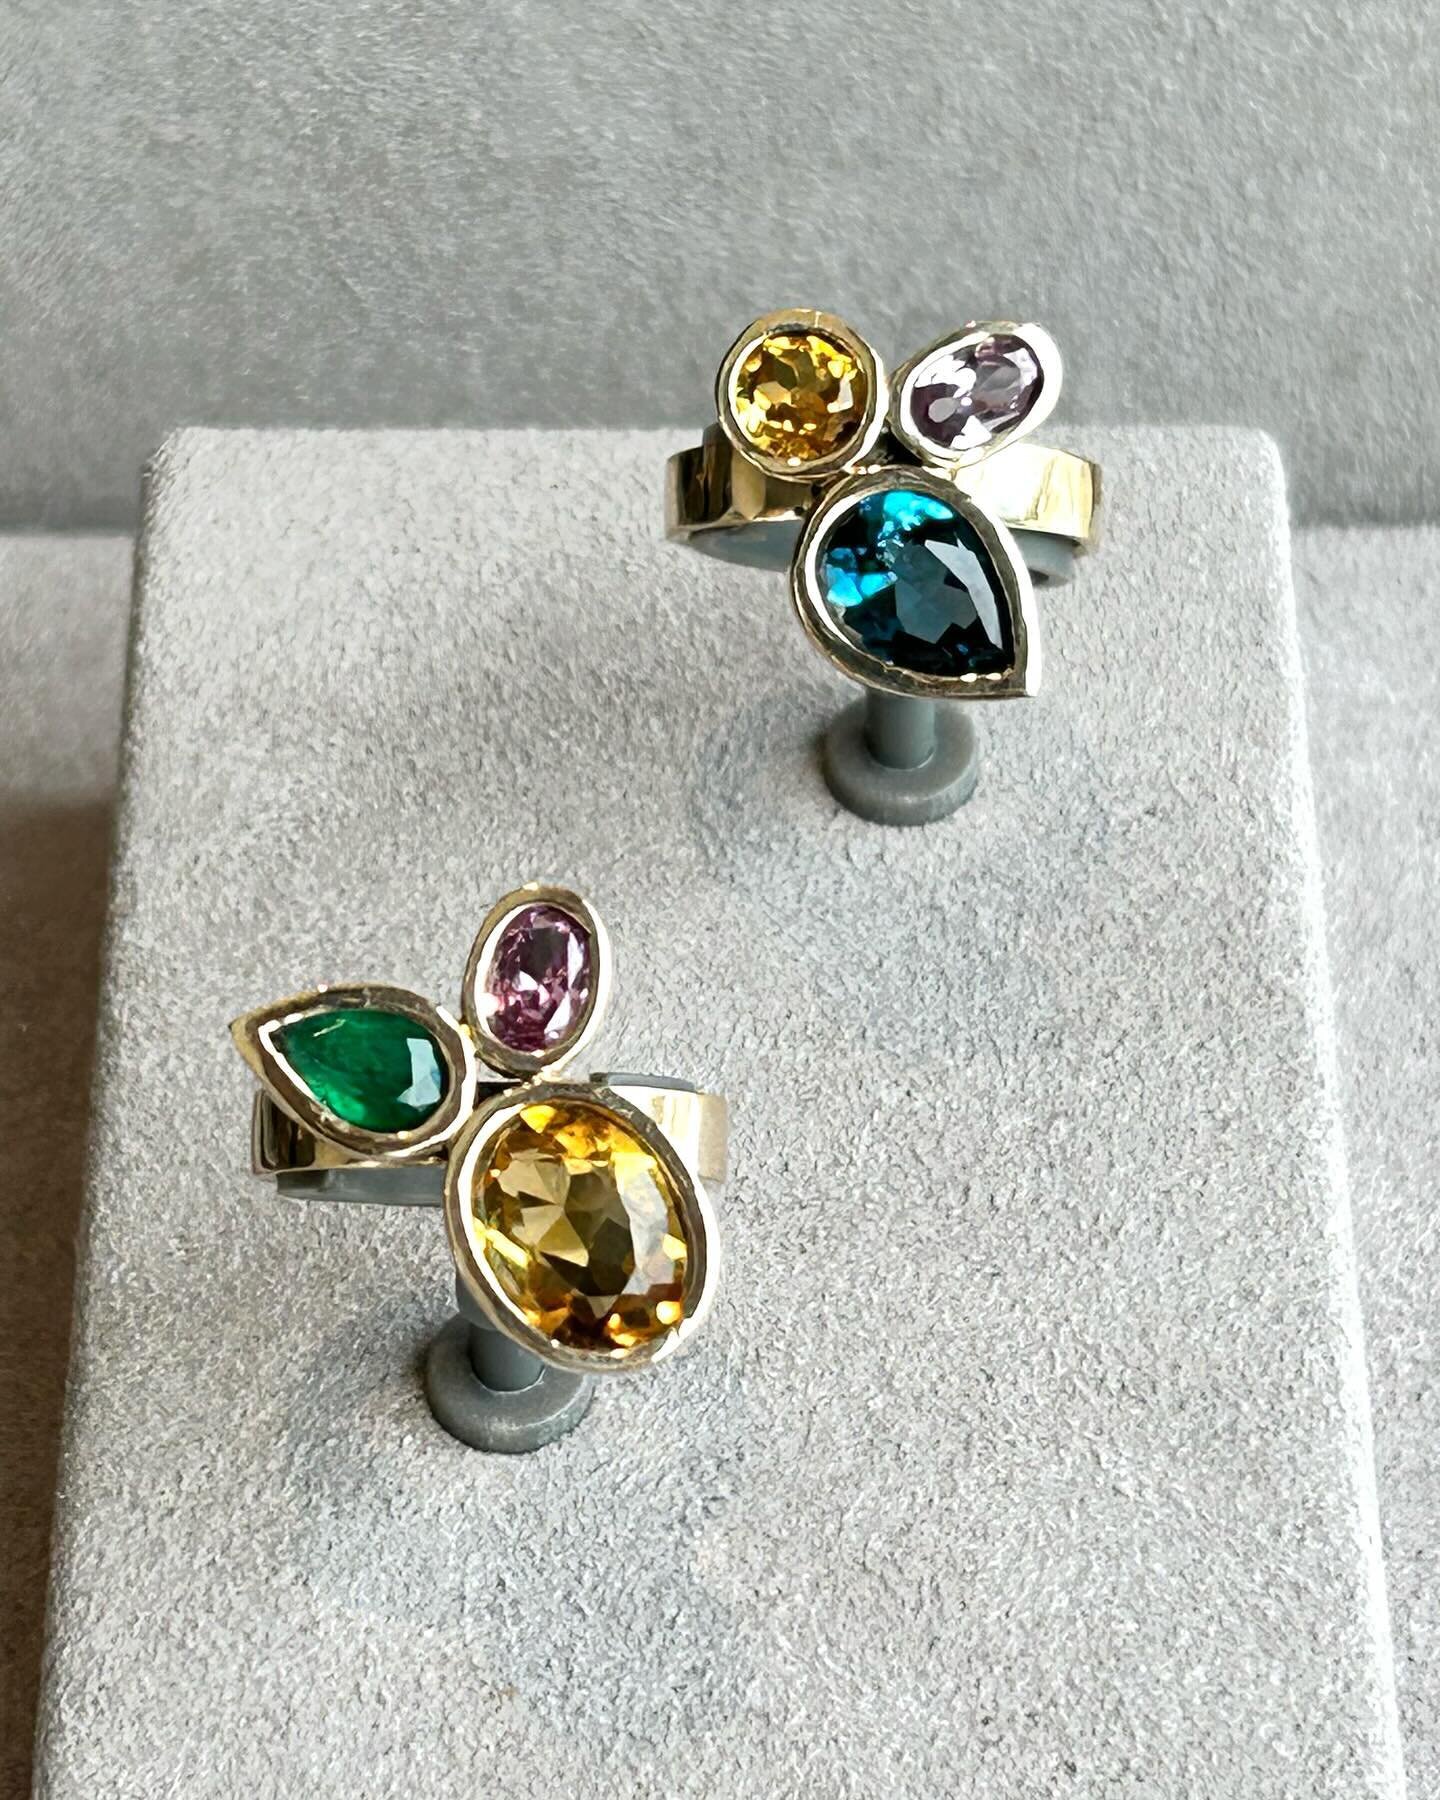 Three Bezel Cluster Rings!! London blue topaz/yellow sapphire/pink sapphire &amp; Citrine/green sapphire/garnet&hellip;. Both created by the talented @lesliepaigejewelry 
.
.
.
#local #saturdayvibes #78209 
#boardwalkonbroadway #satxboutique #preciou